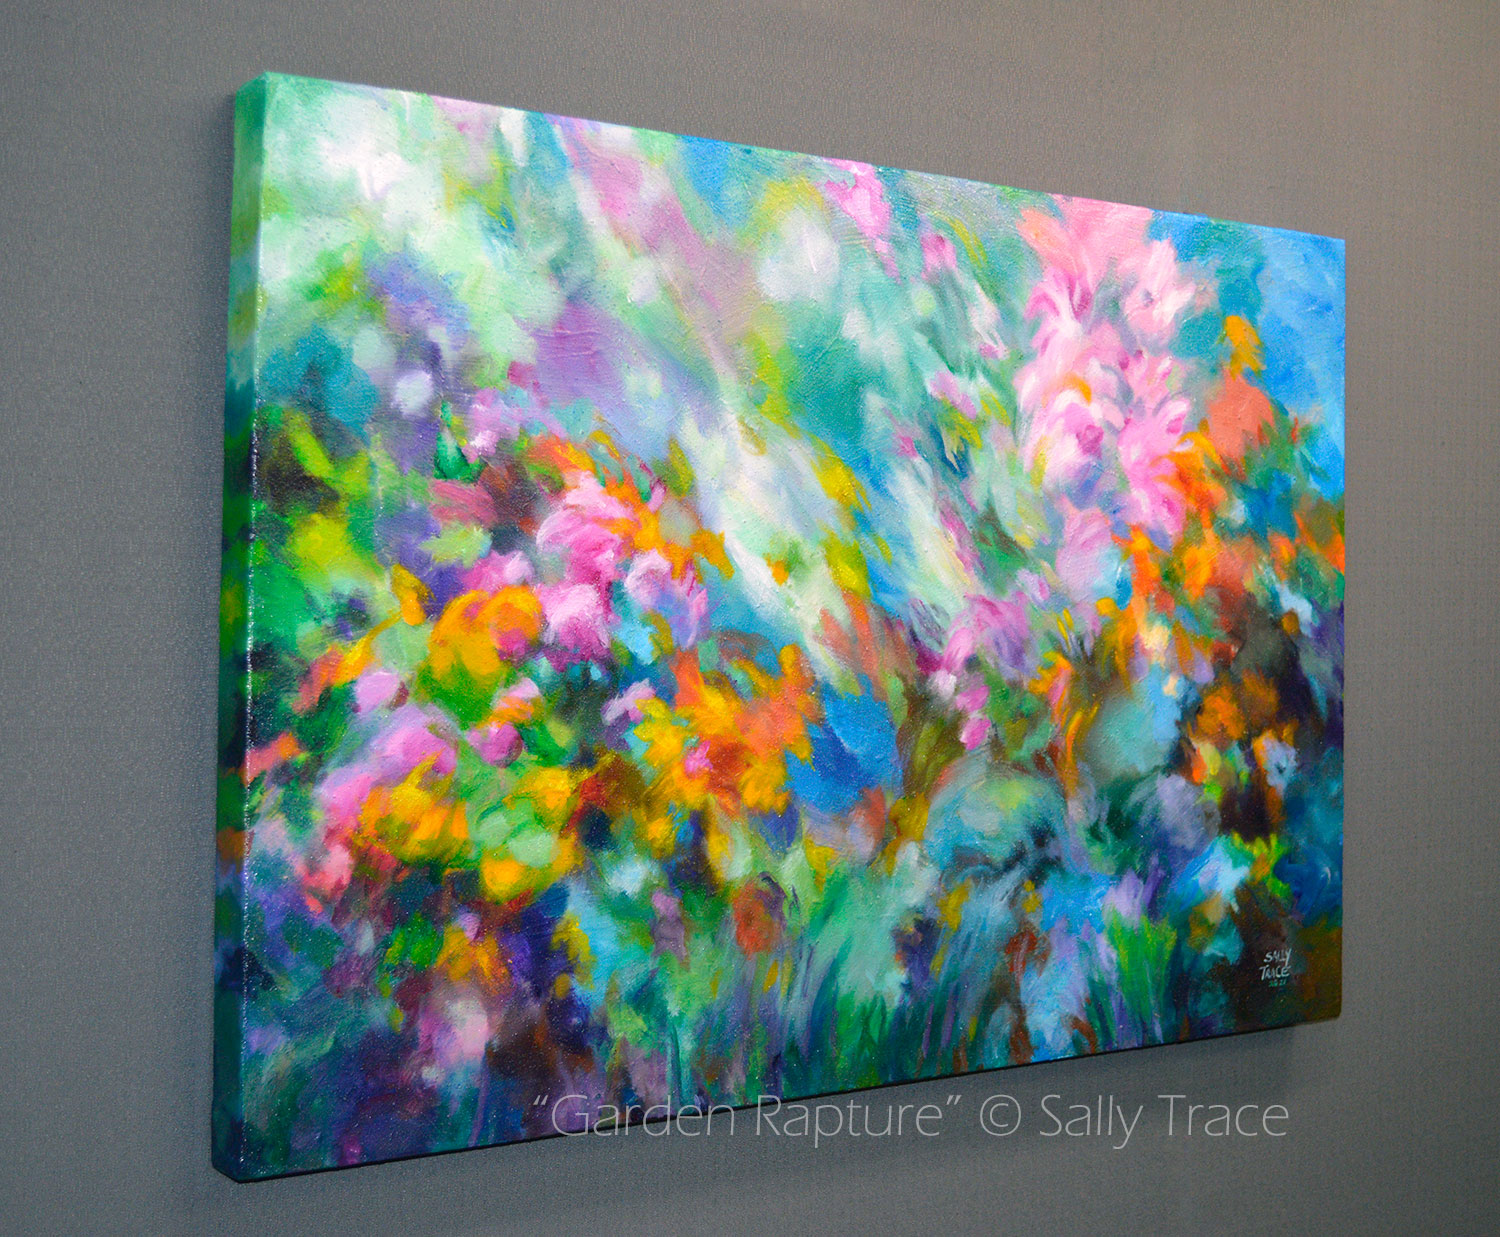 Abstract mixed media textured impasto painting "Garden Rapture" 24x36 inches, 1.5 inches deep with a very textured surface.  Original abstract art for sale.  I was really enjoying the late summer blossoms this year, and the feeling made it's way into this painting.  Filled with beautiful, colorful summer floral blossoms. left view